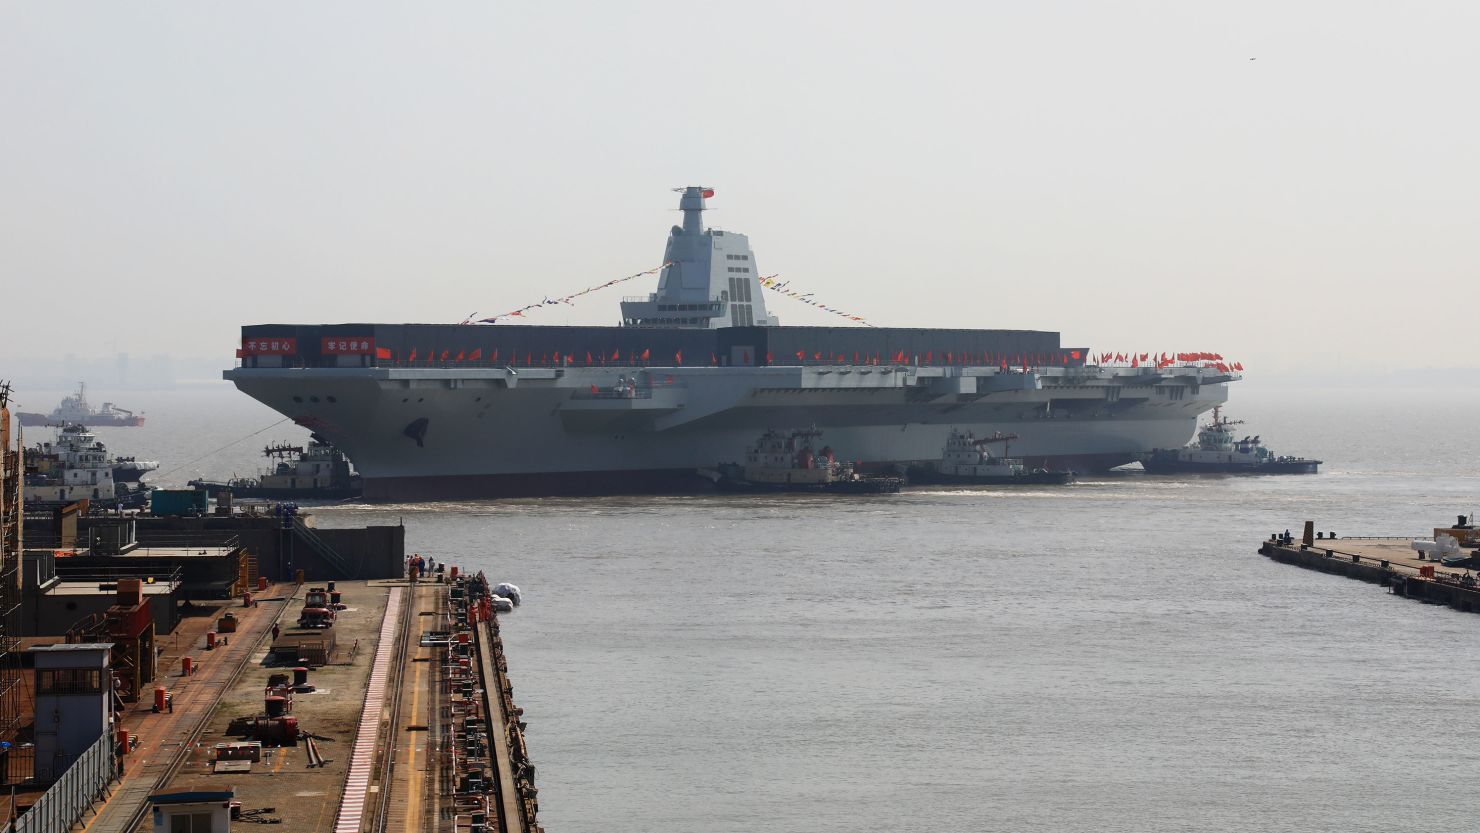 General view of the launching ceremony of China's third aircraft carrier, the Fujian, named after Fujian Province, at Jiangnan Shipyard, a subsidiary of China State Shipbuilding Corporation, on June 17, 2022, in Shanghai, China.